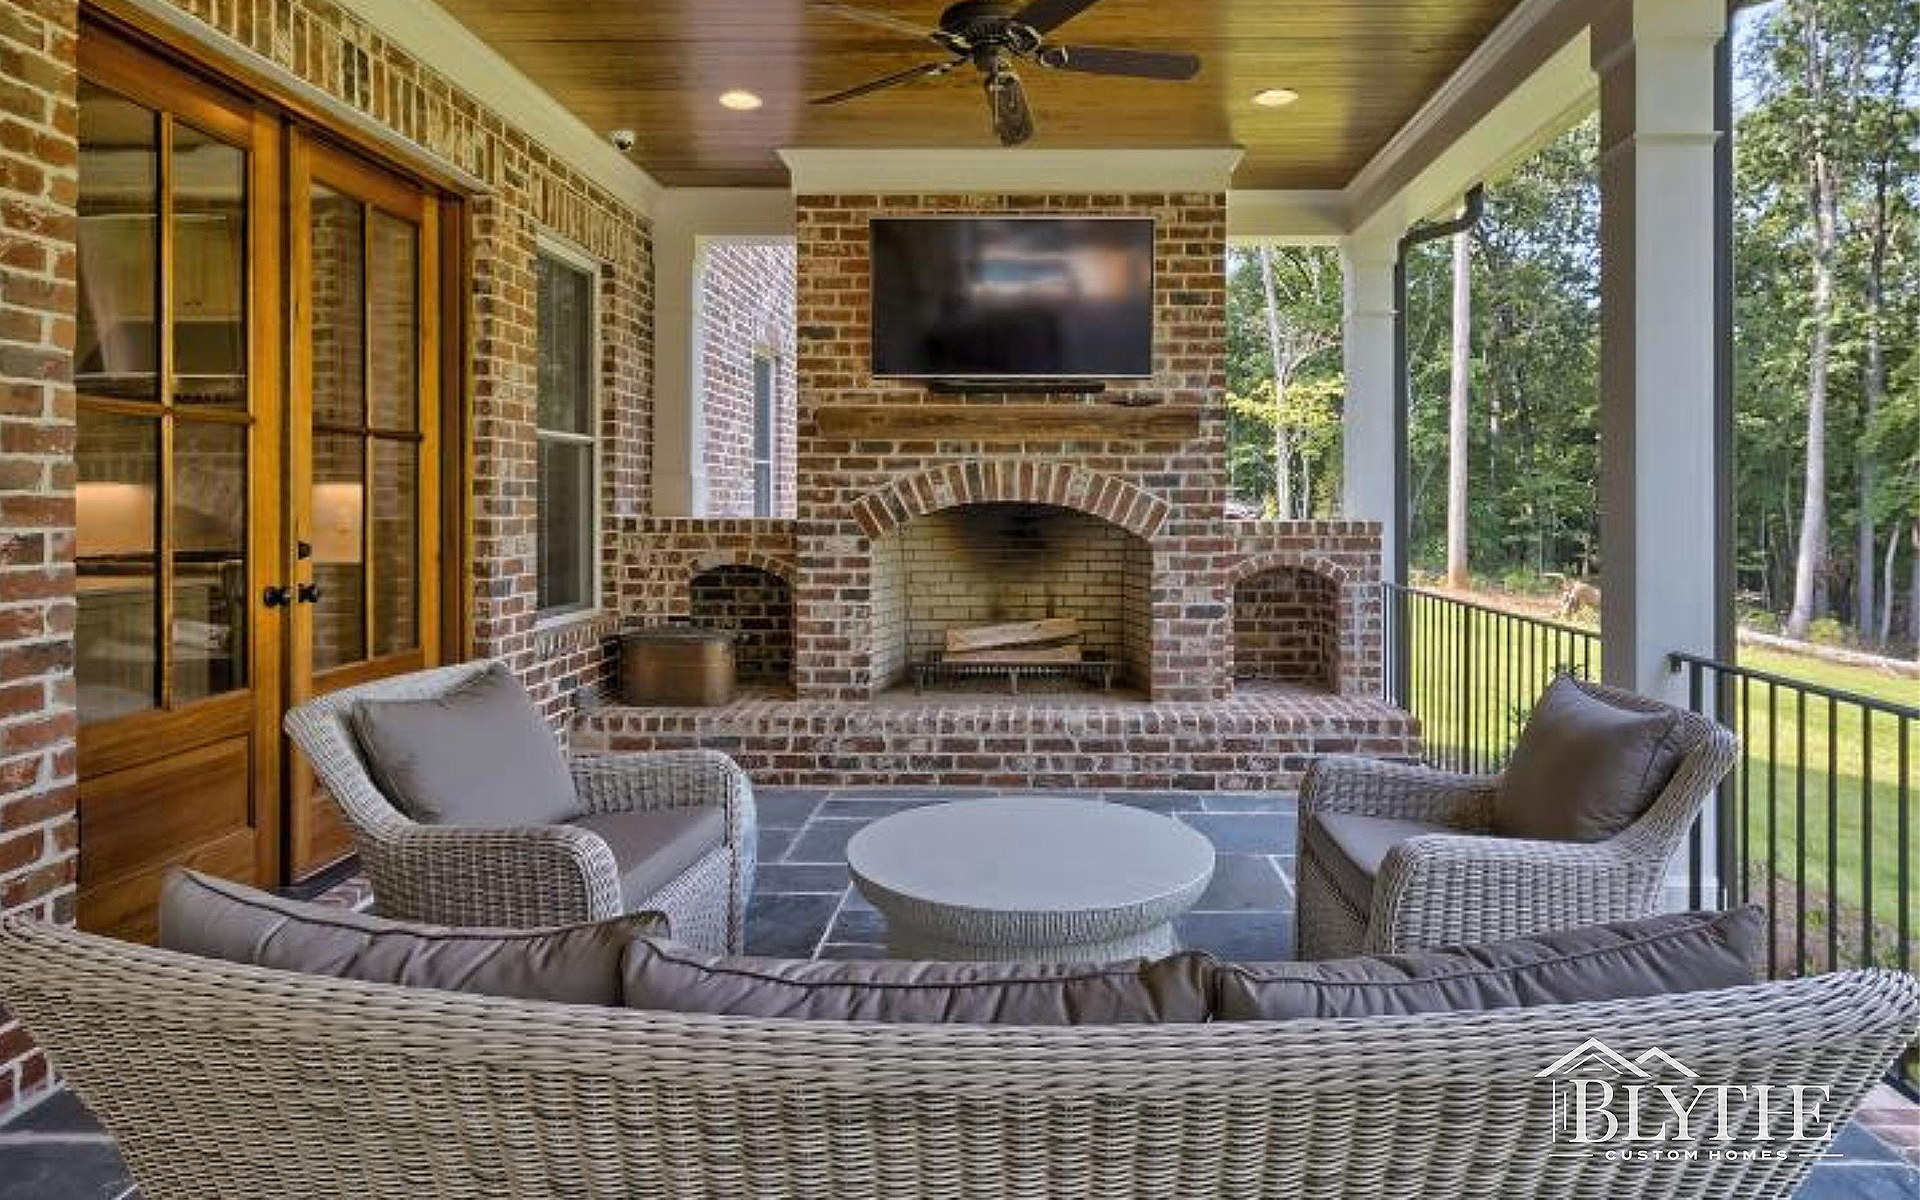 Blythe Custom Homes' Outdoor Fireplace on Large Back Porch